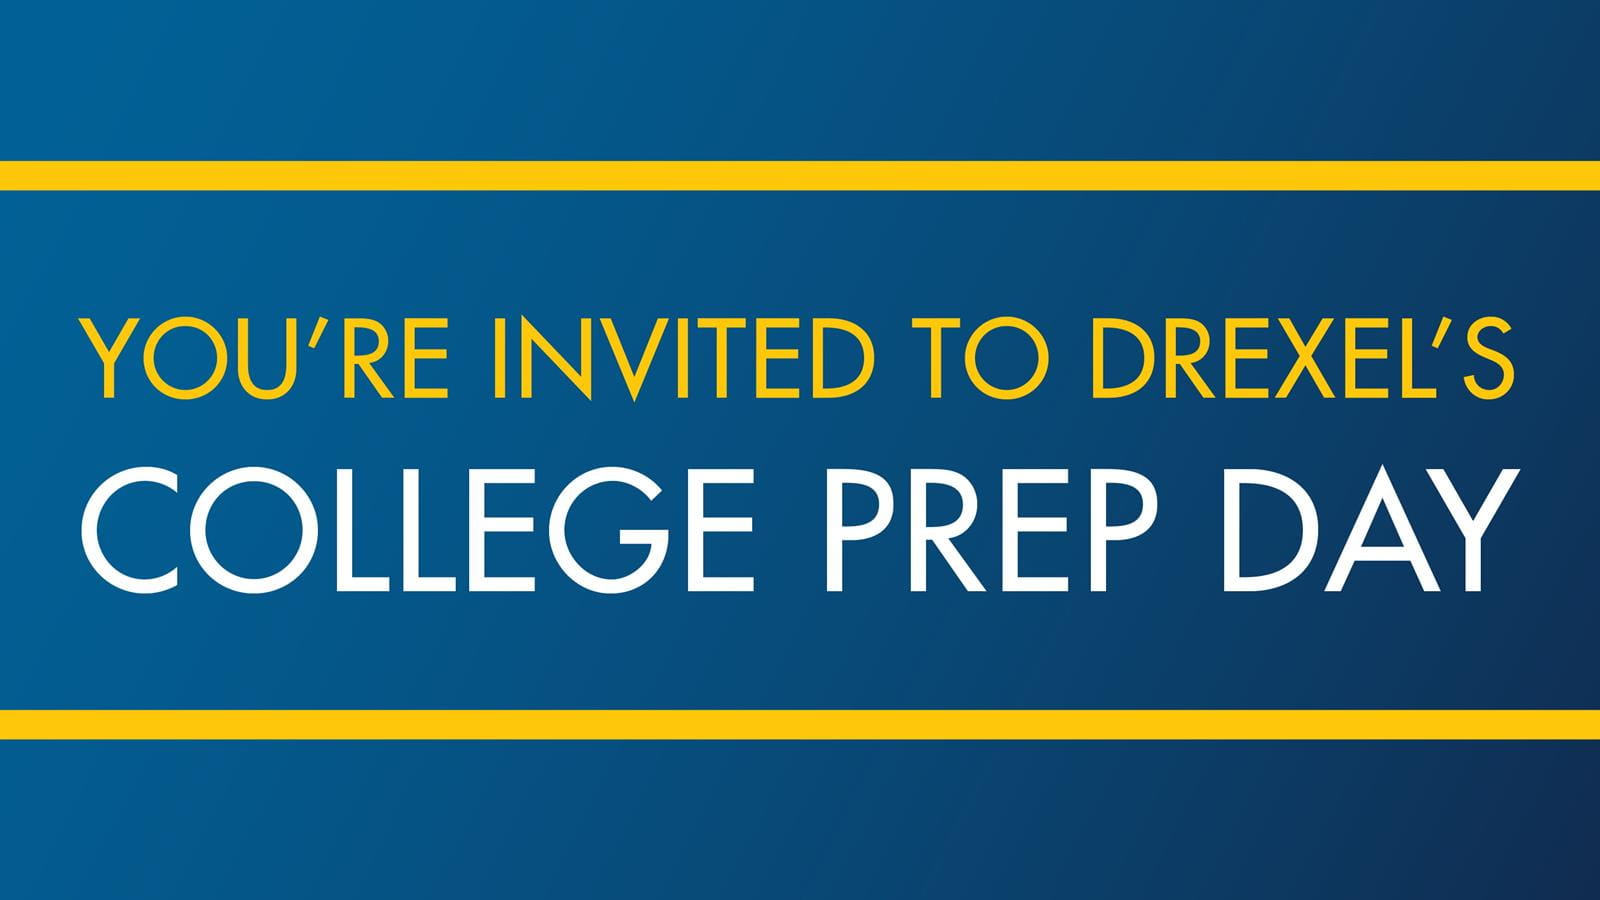 You're Invited to Drexel's College Prep Day